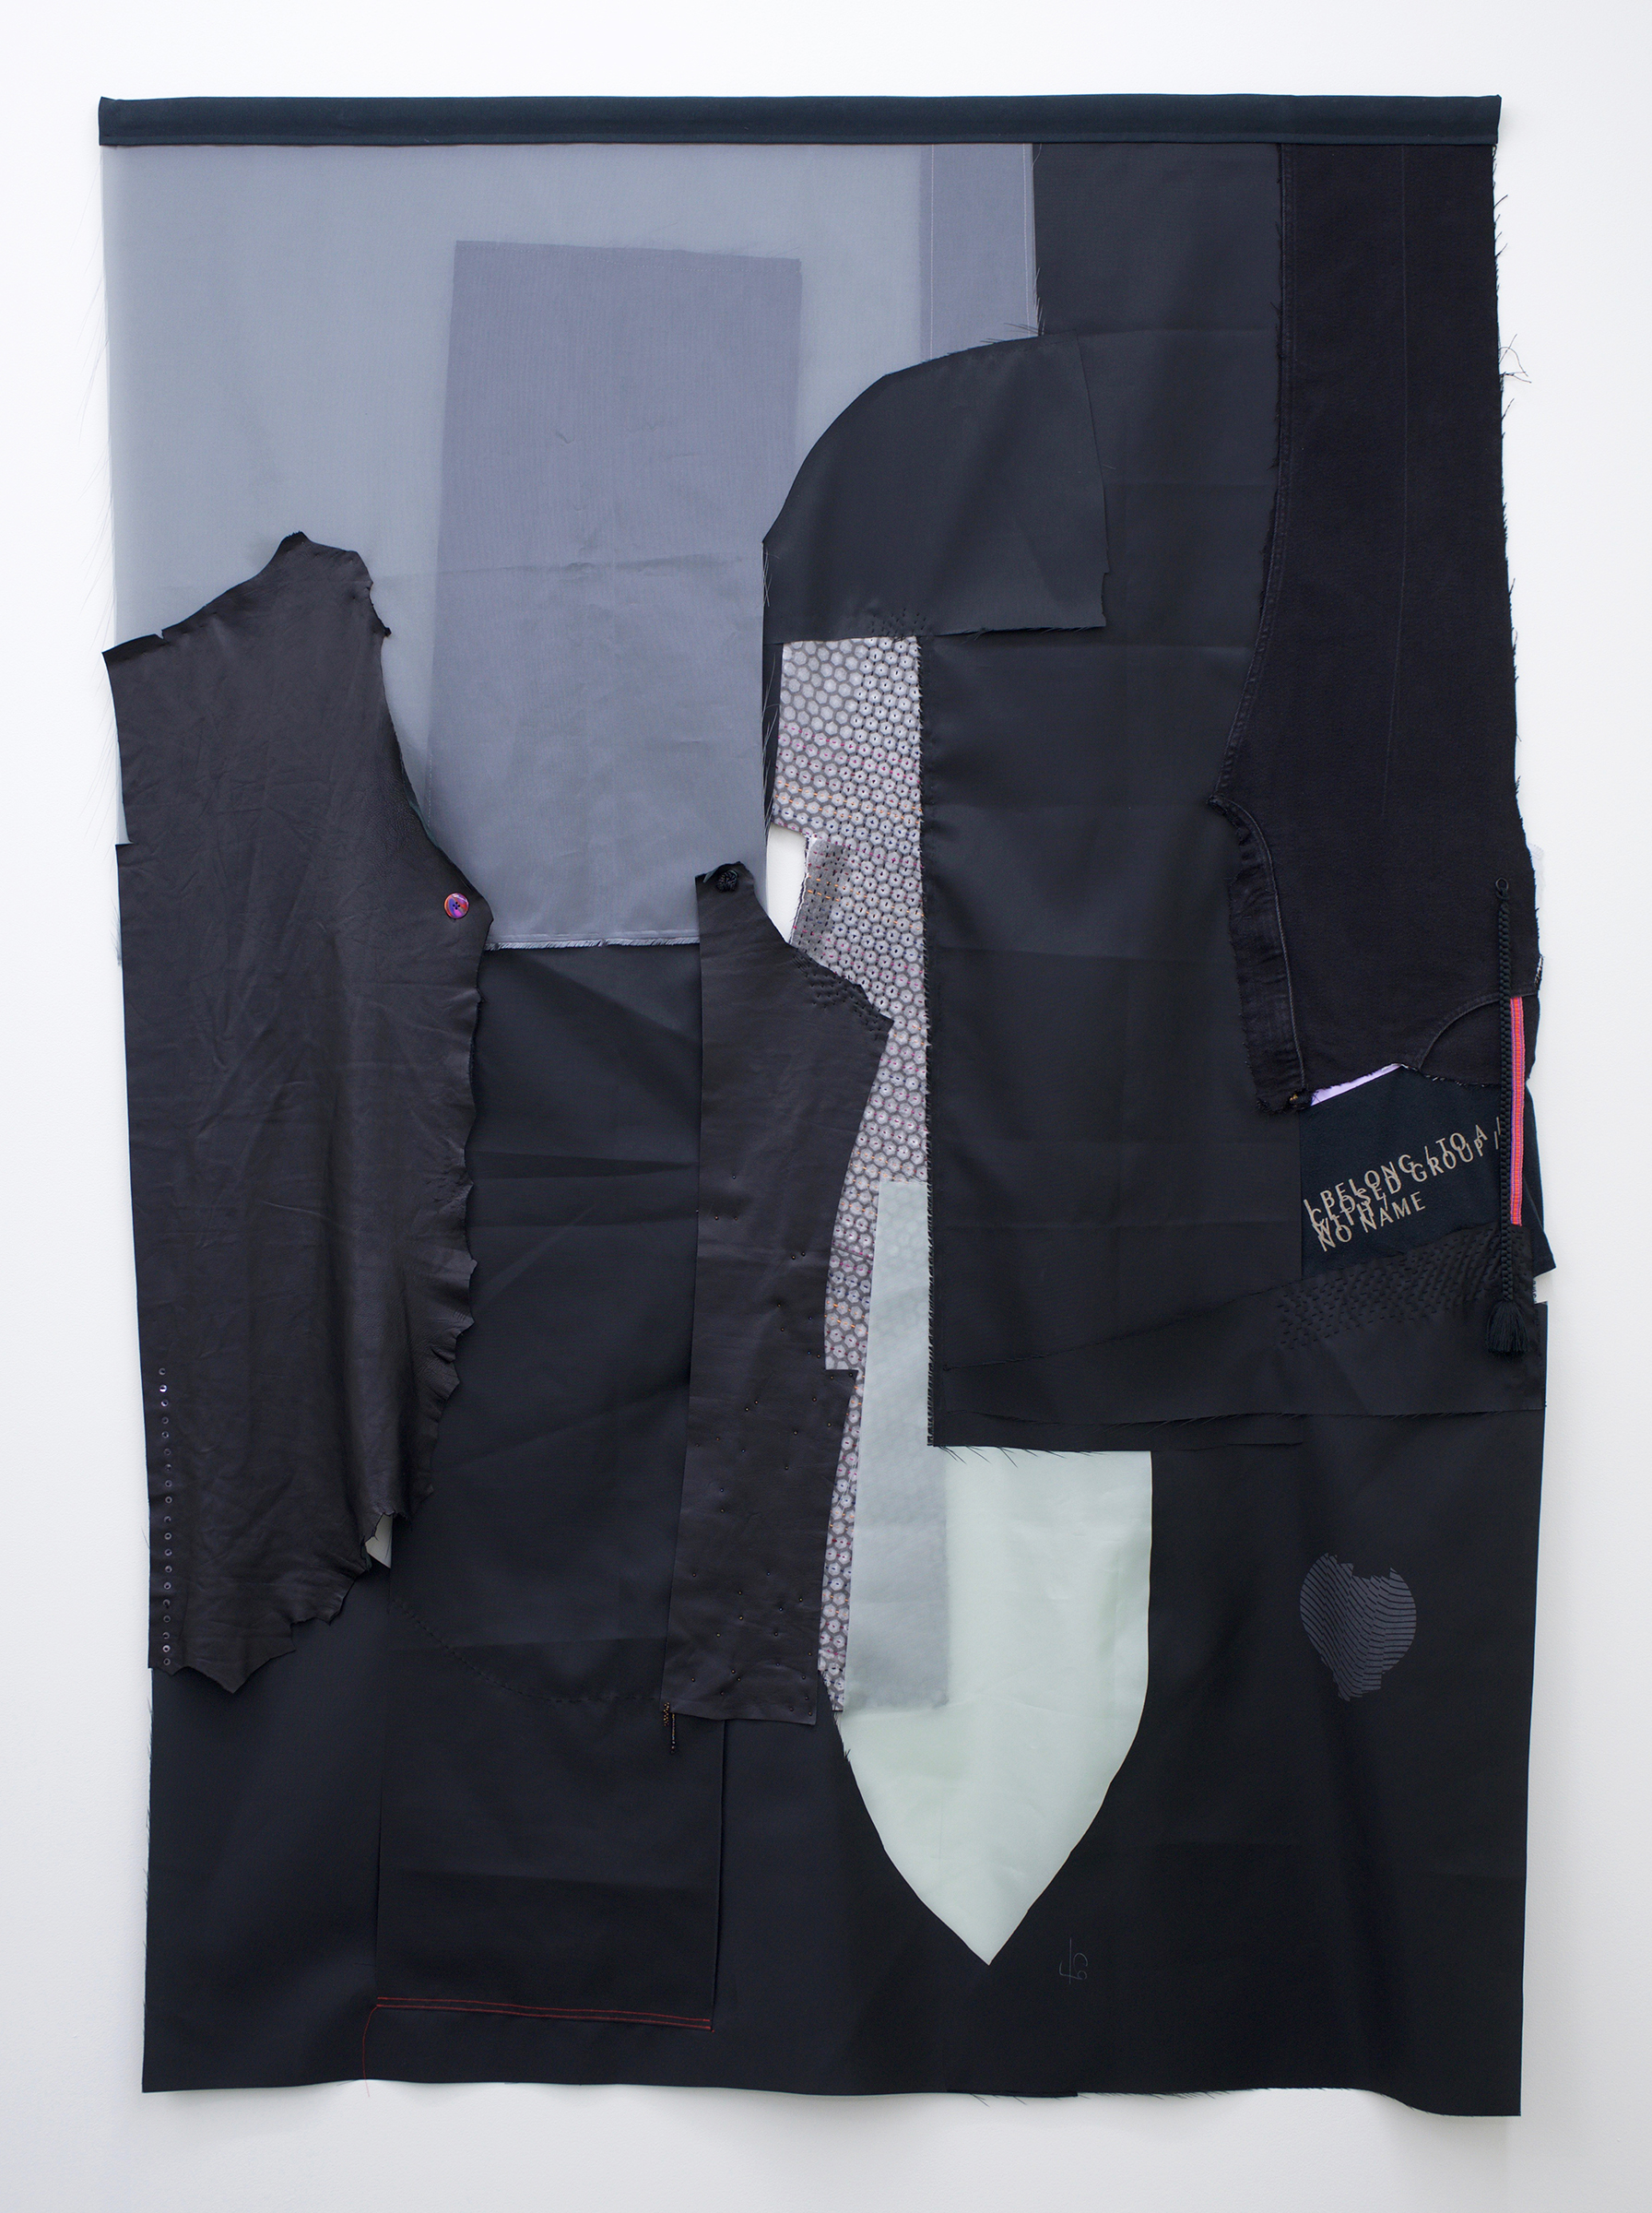  AMANDA CURRERI I Belong to a Closed Group With No Name*, 2018 Recycled flag nylon, leather, cotton with rice paste resist and soot/soya printing, sequins, thread, inkle weaving, vintage Japanese braid, and canvas with grommets, 72 x 48" *Title is fr